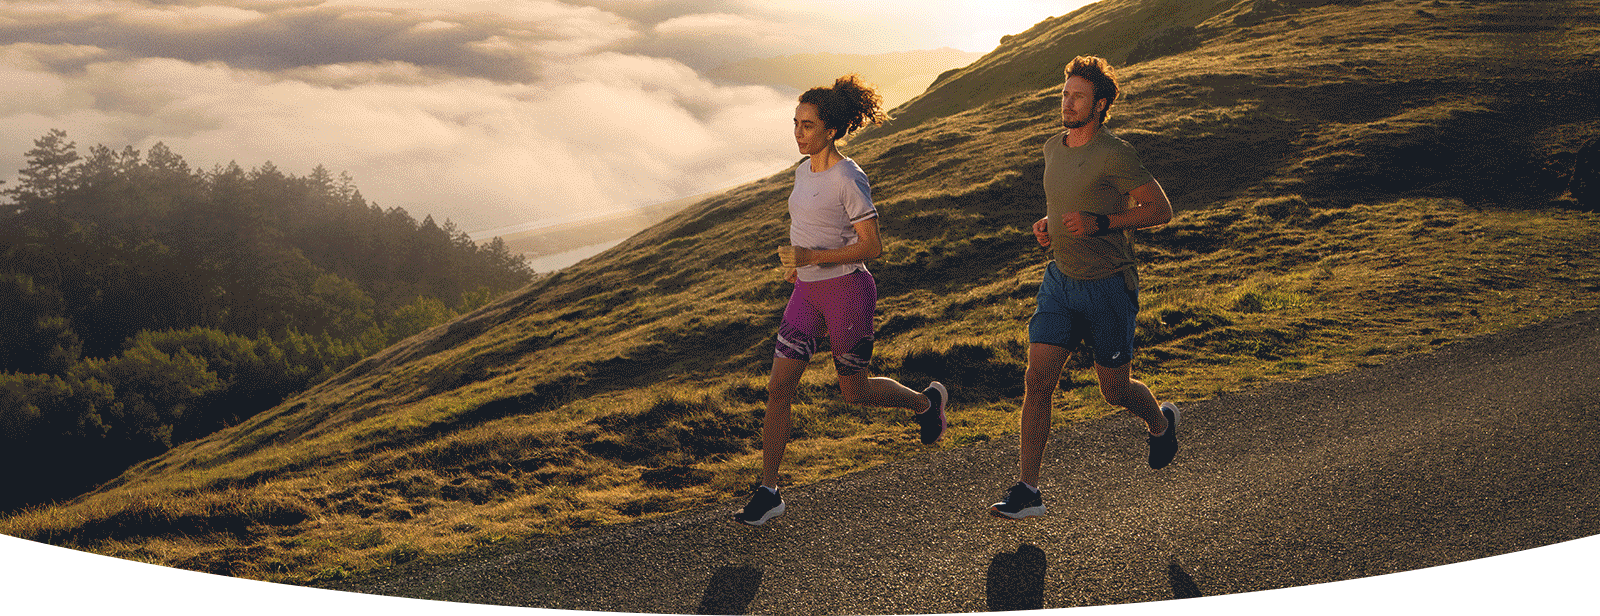 Gif of people running, resting, and posing in ASICS clothing.